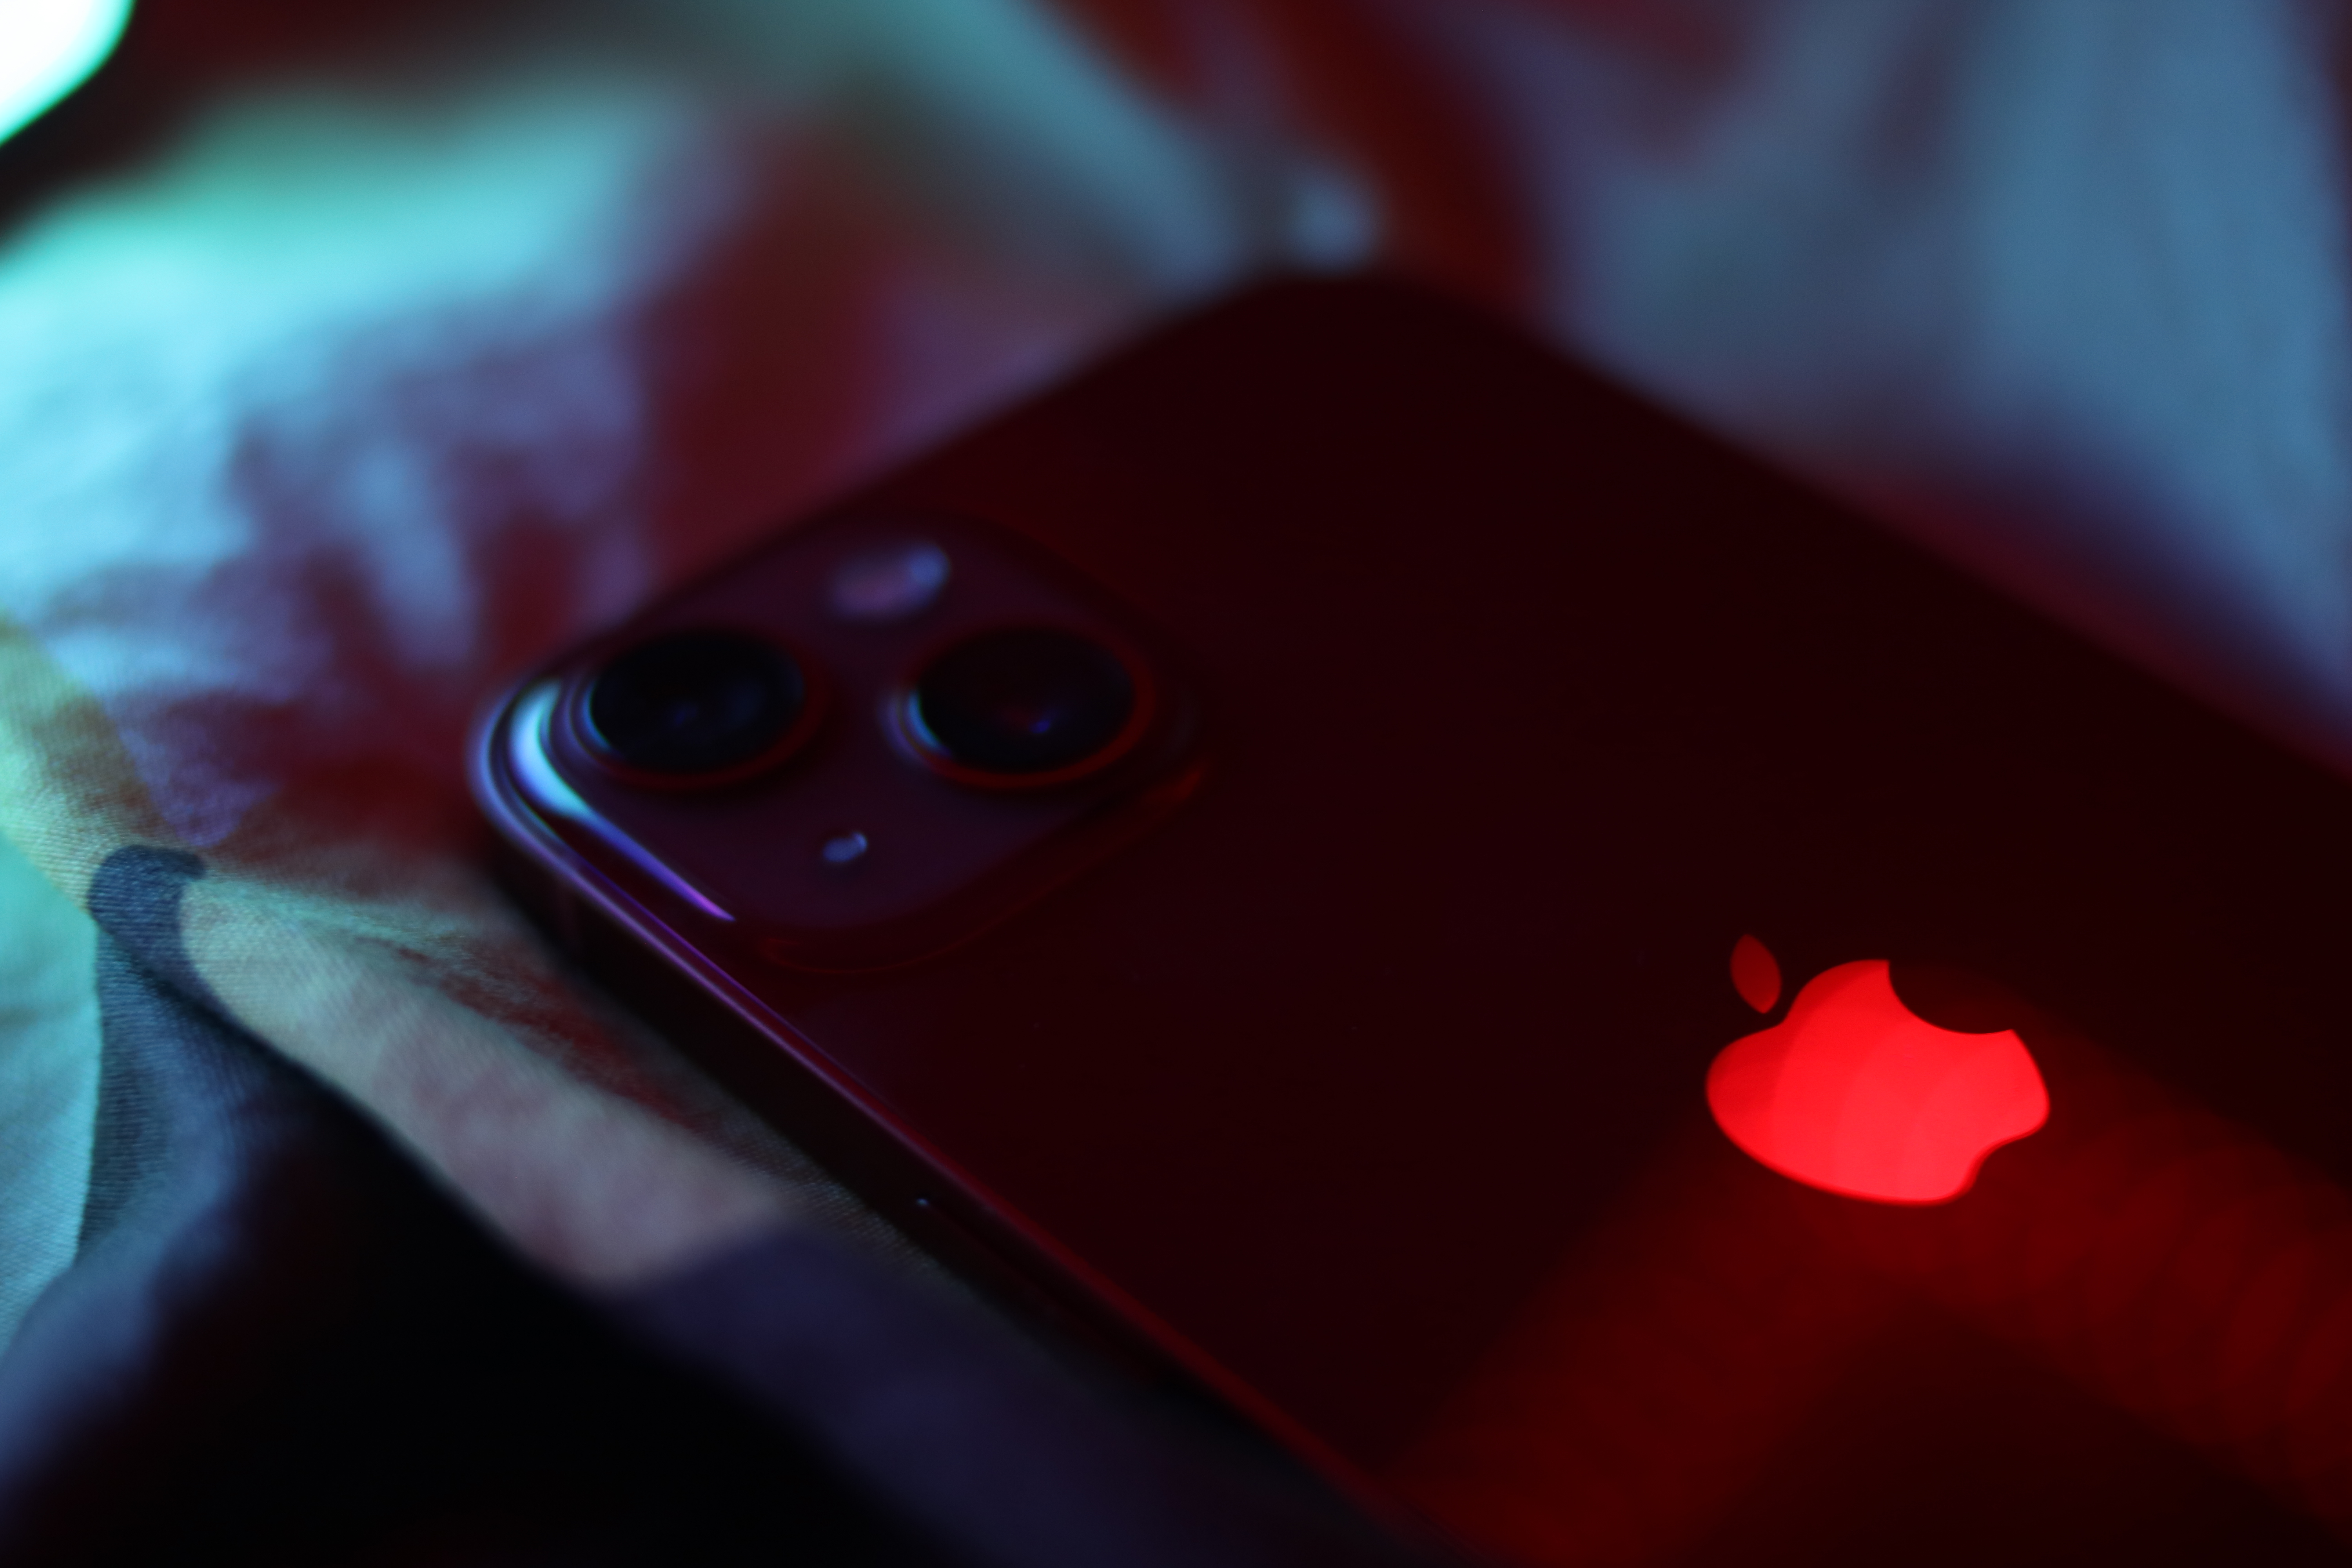 iPhone13 handset with glowing Apple logo